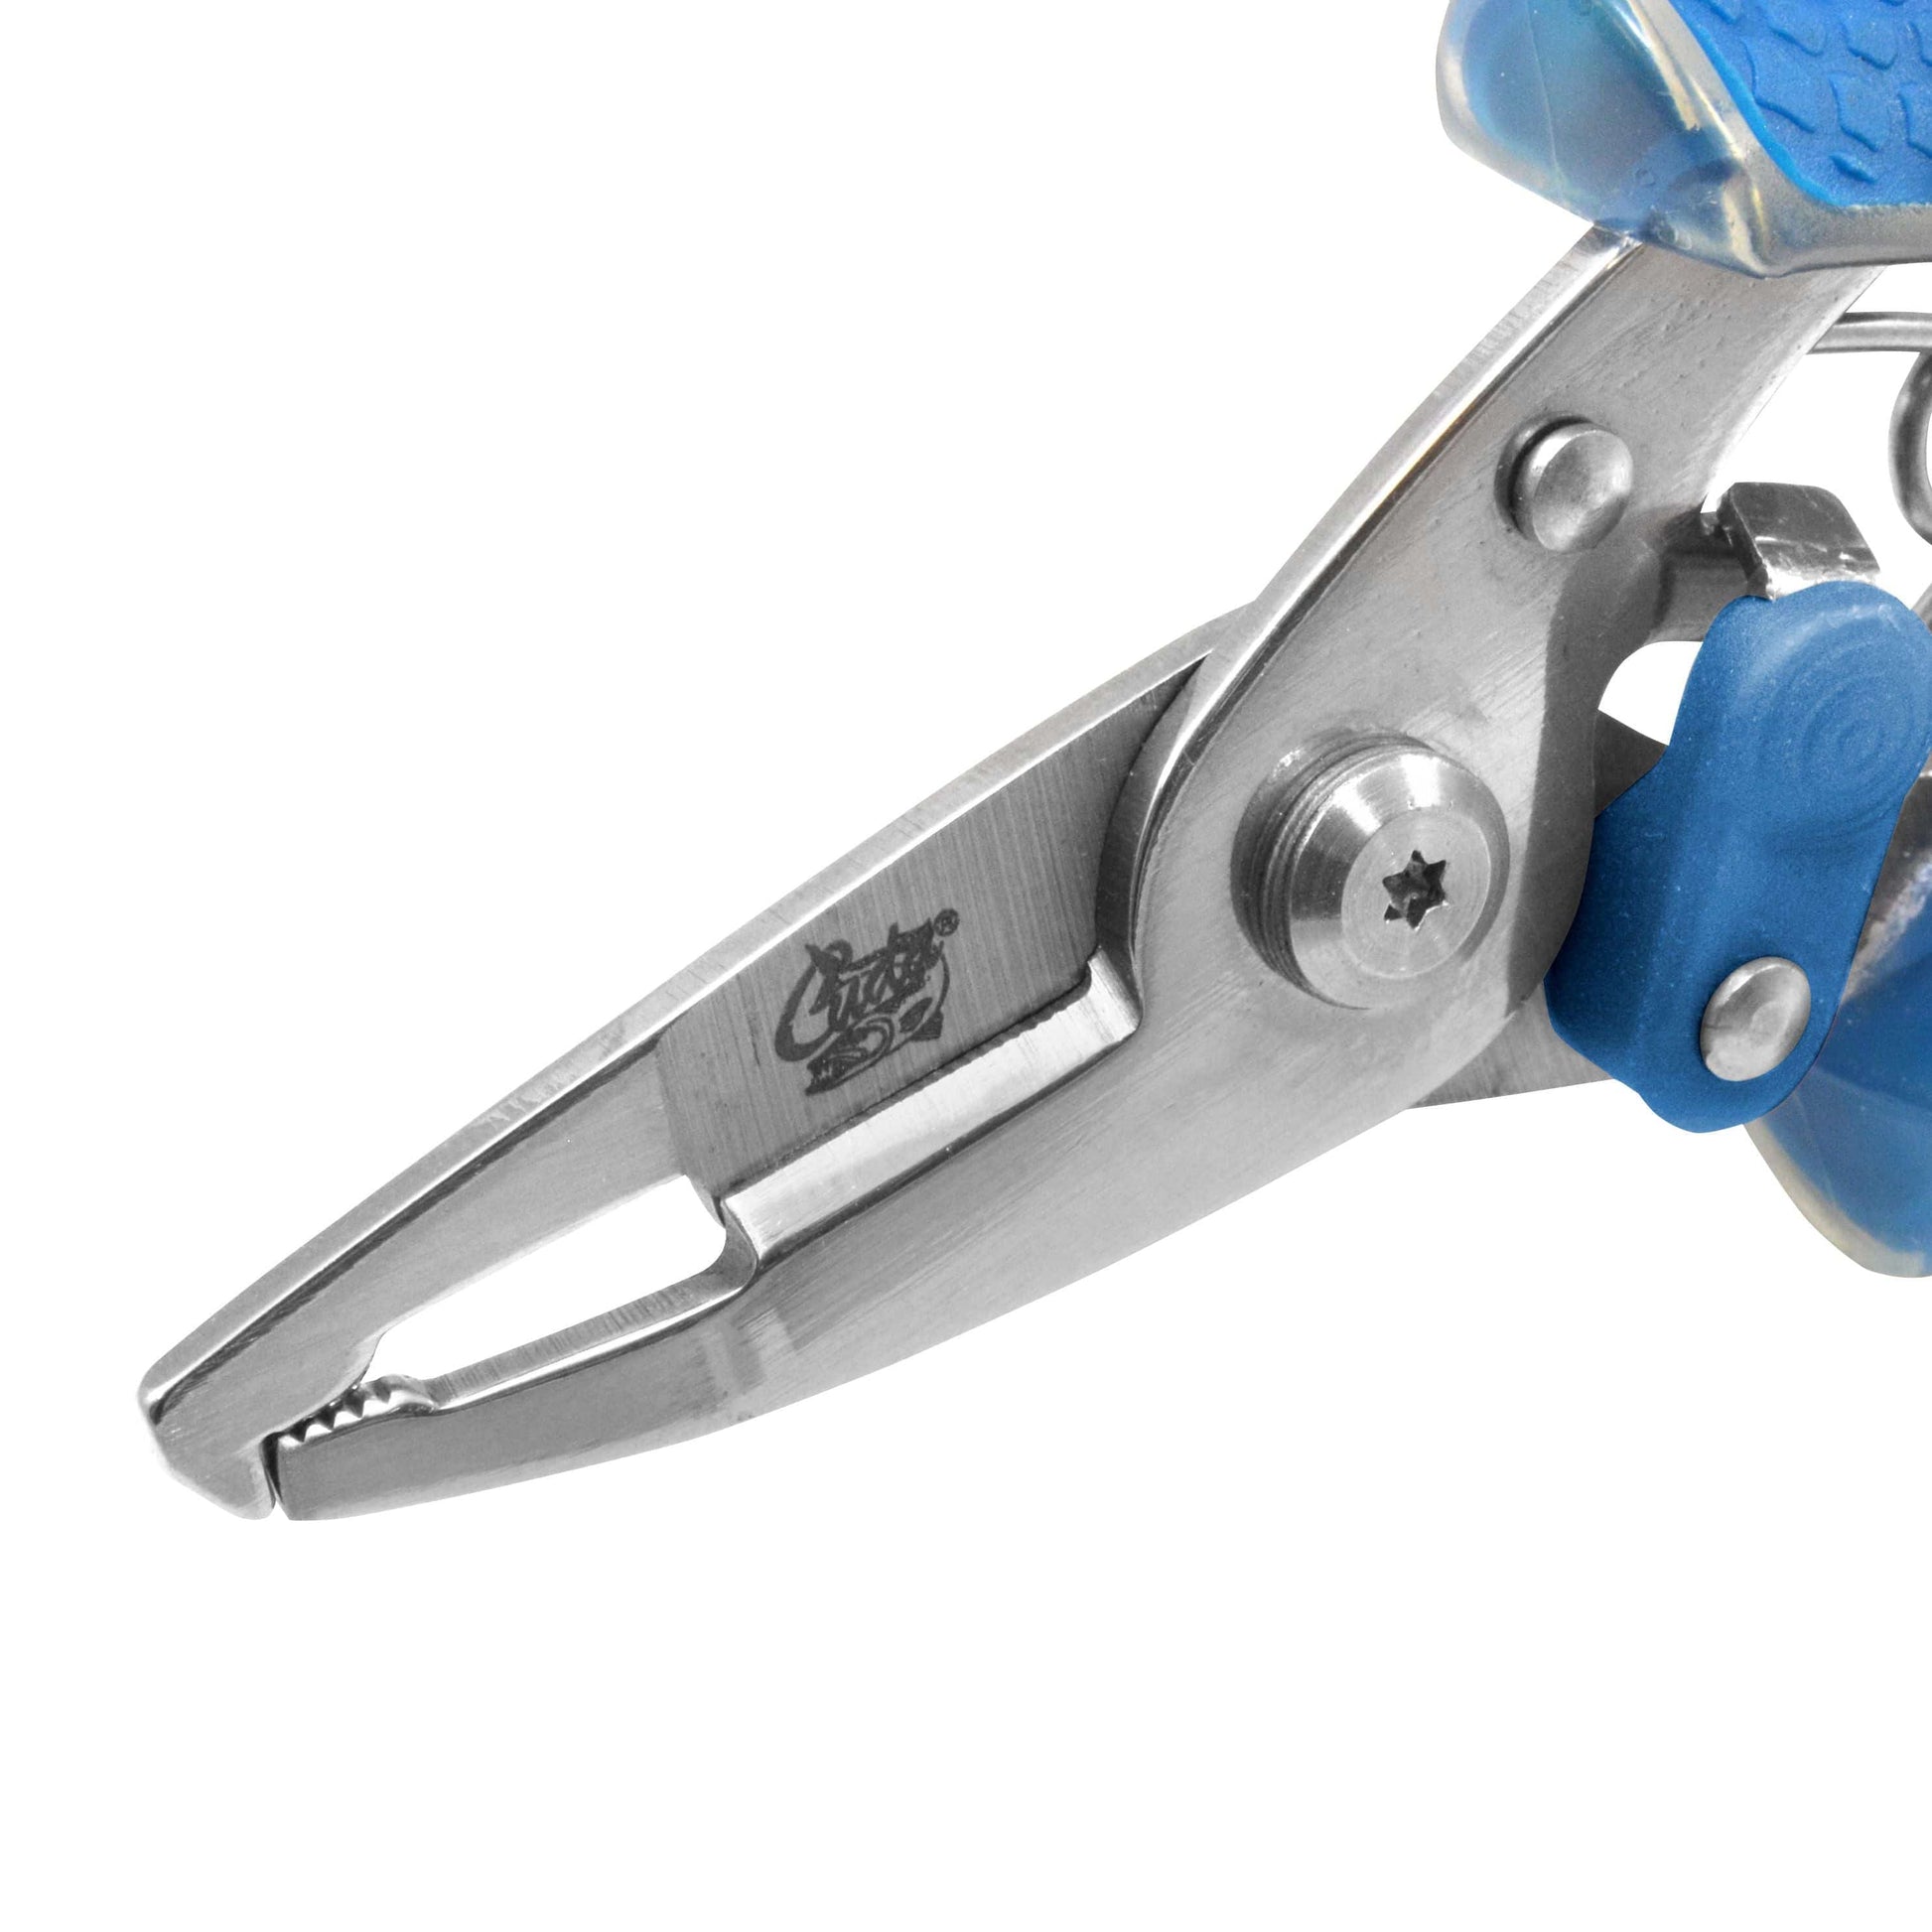 Plaztek Cuda mini 4" split ring plier showing the stainless steel polished blades. Plier had thumb lock to keep shut when not in use.